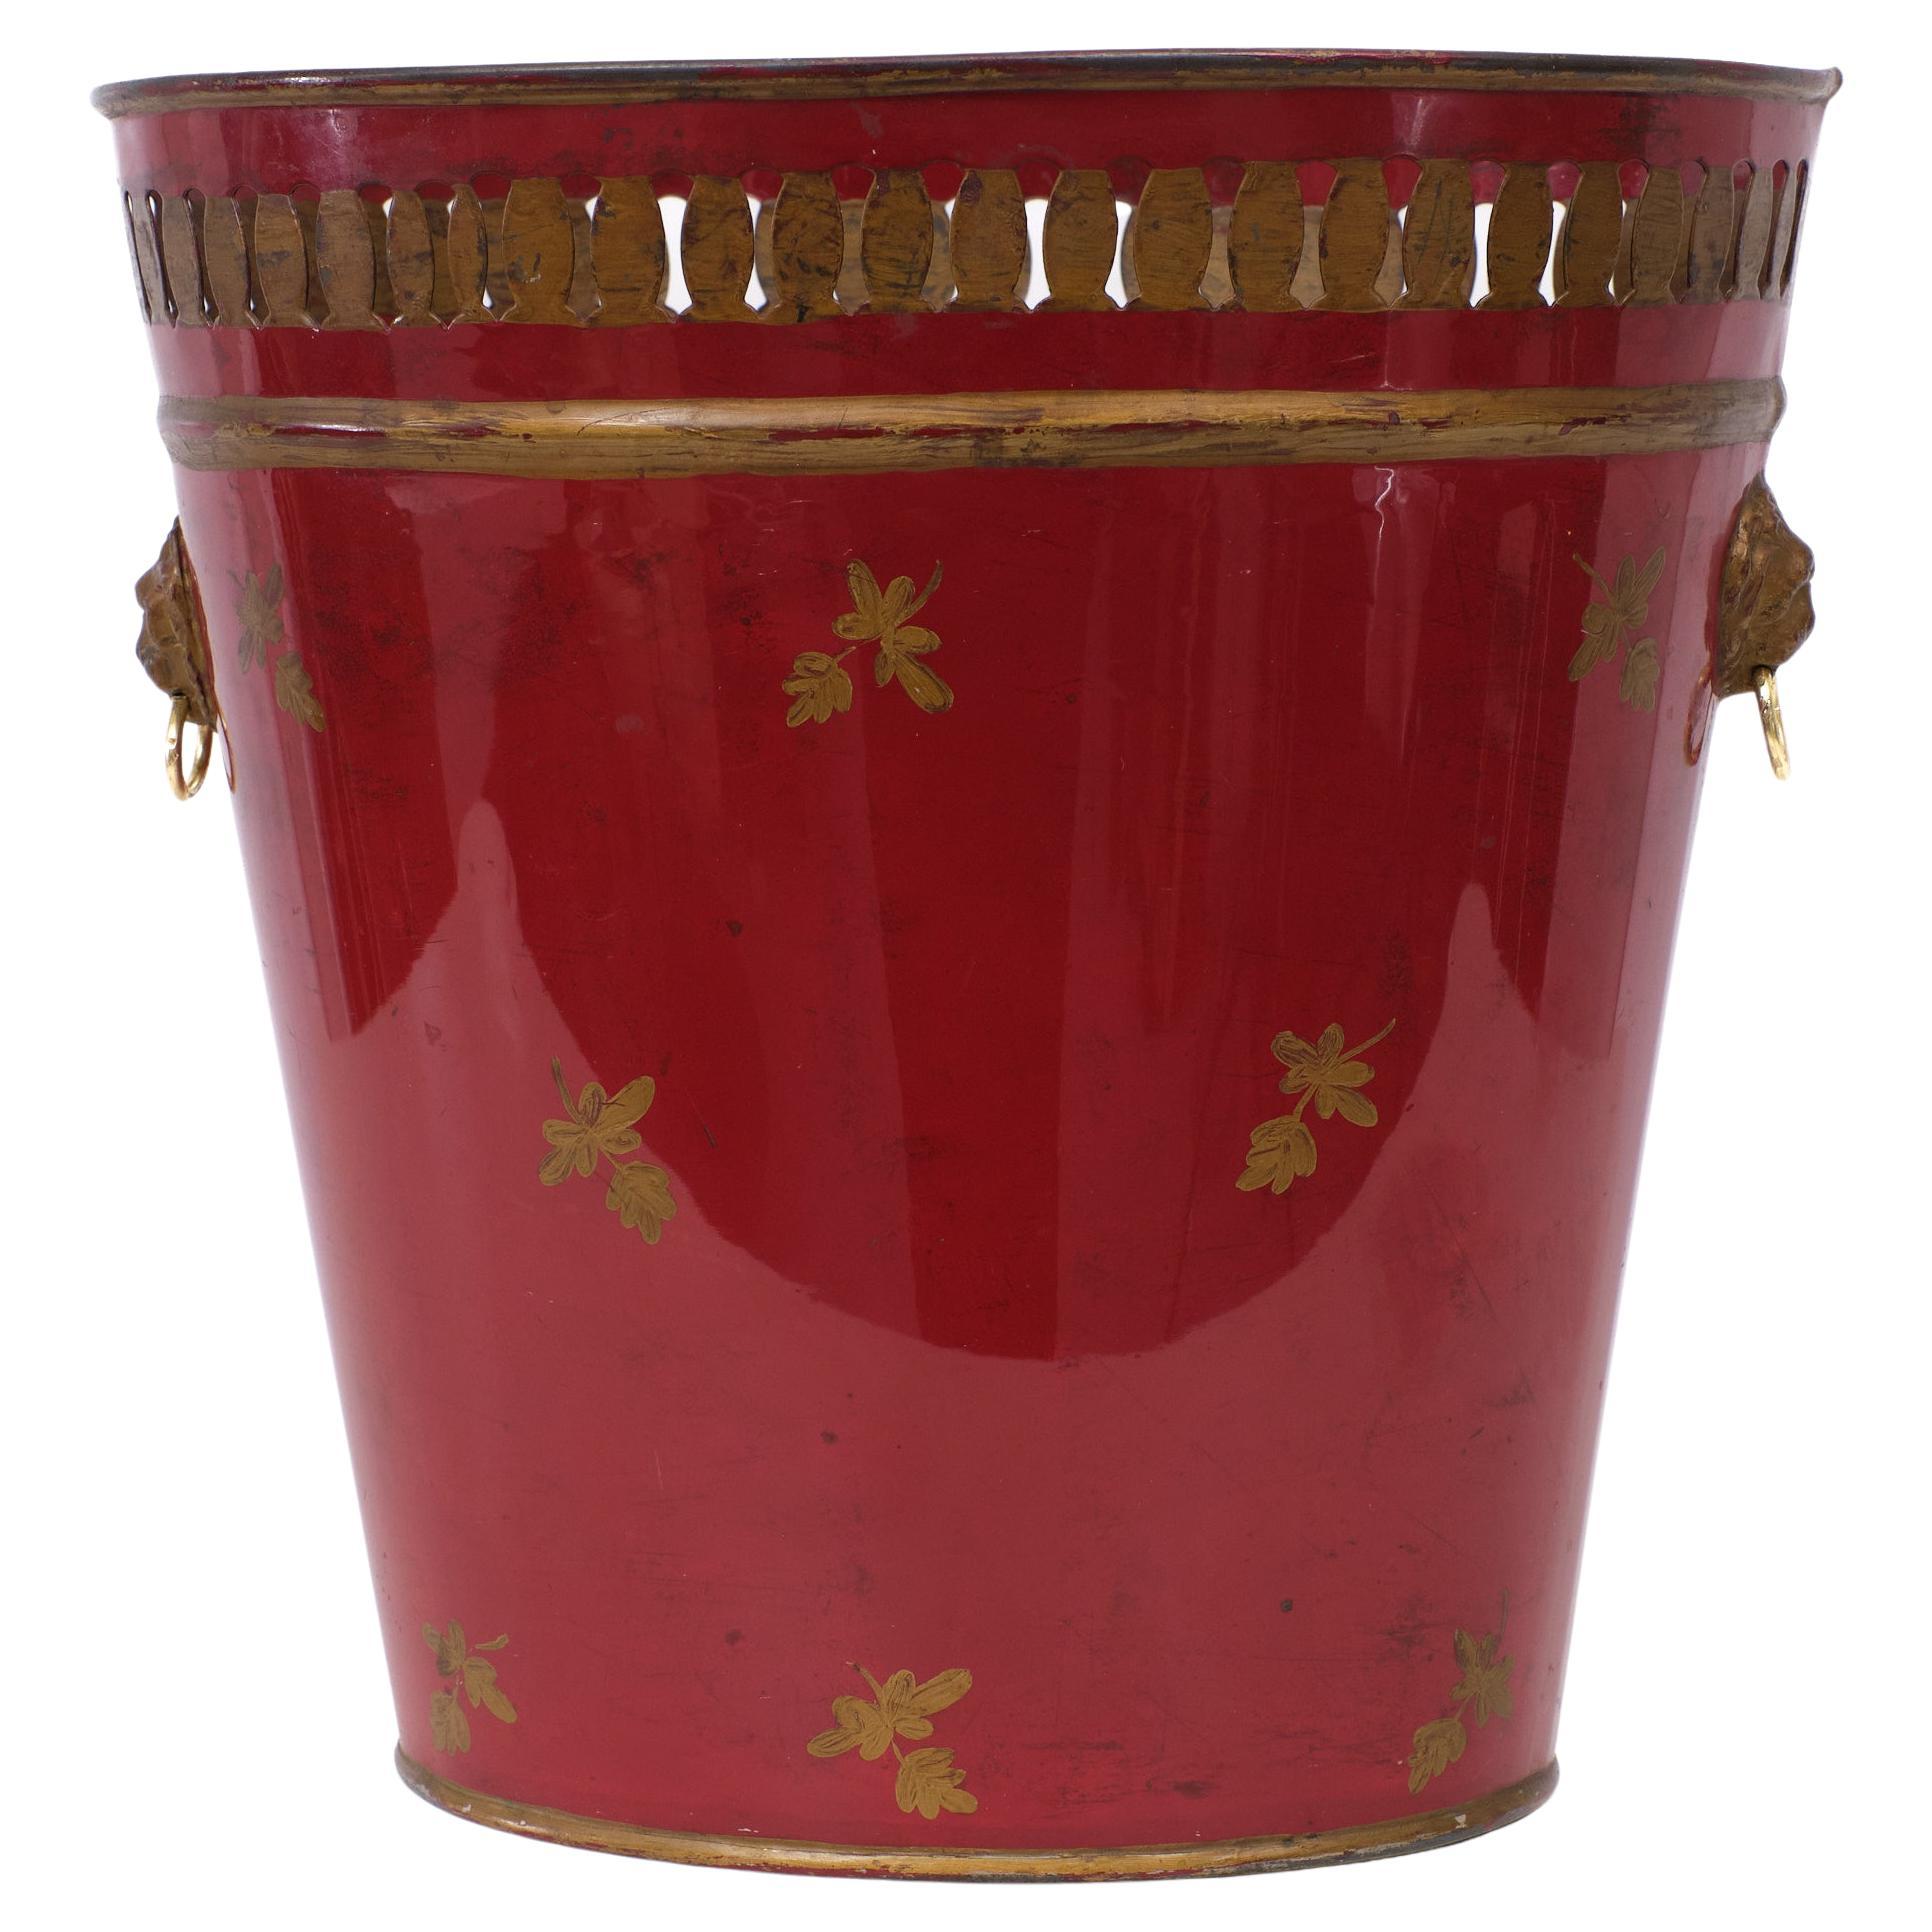 Very nice small Metal waste basket . Beautiful Red color ,comes with hand painted 
Gold color lining and decorations .Two Bronze Lions heads with brass rings .
Perforated rim on top .  so classy 